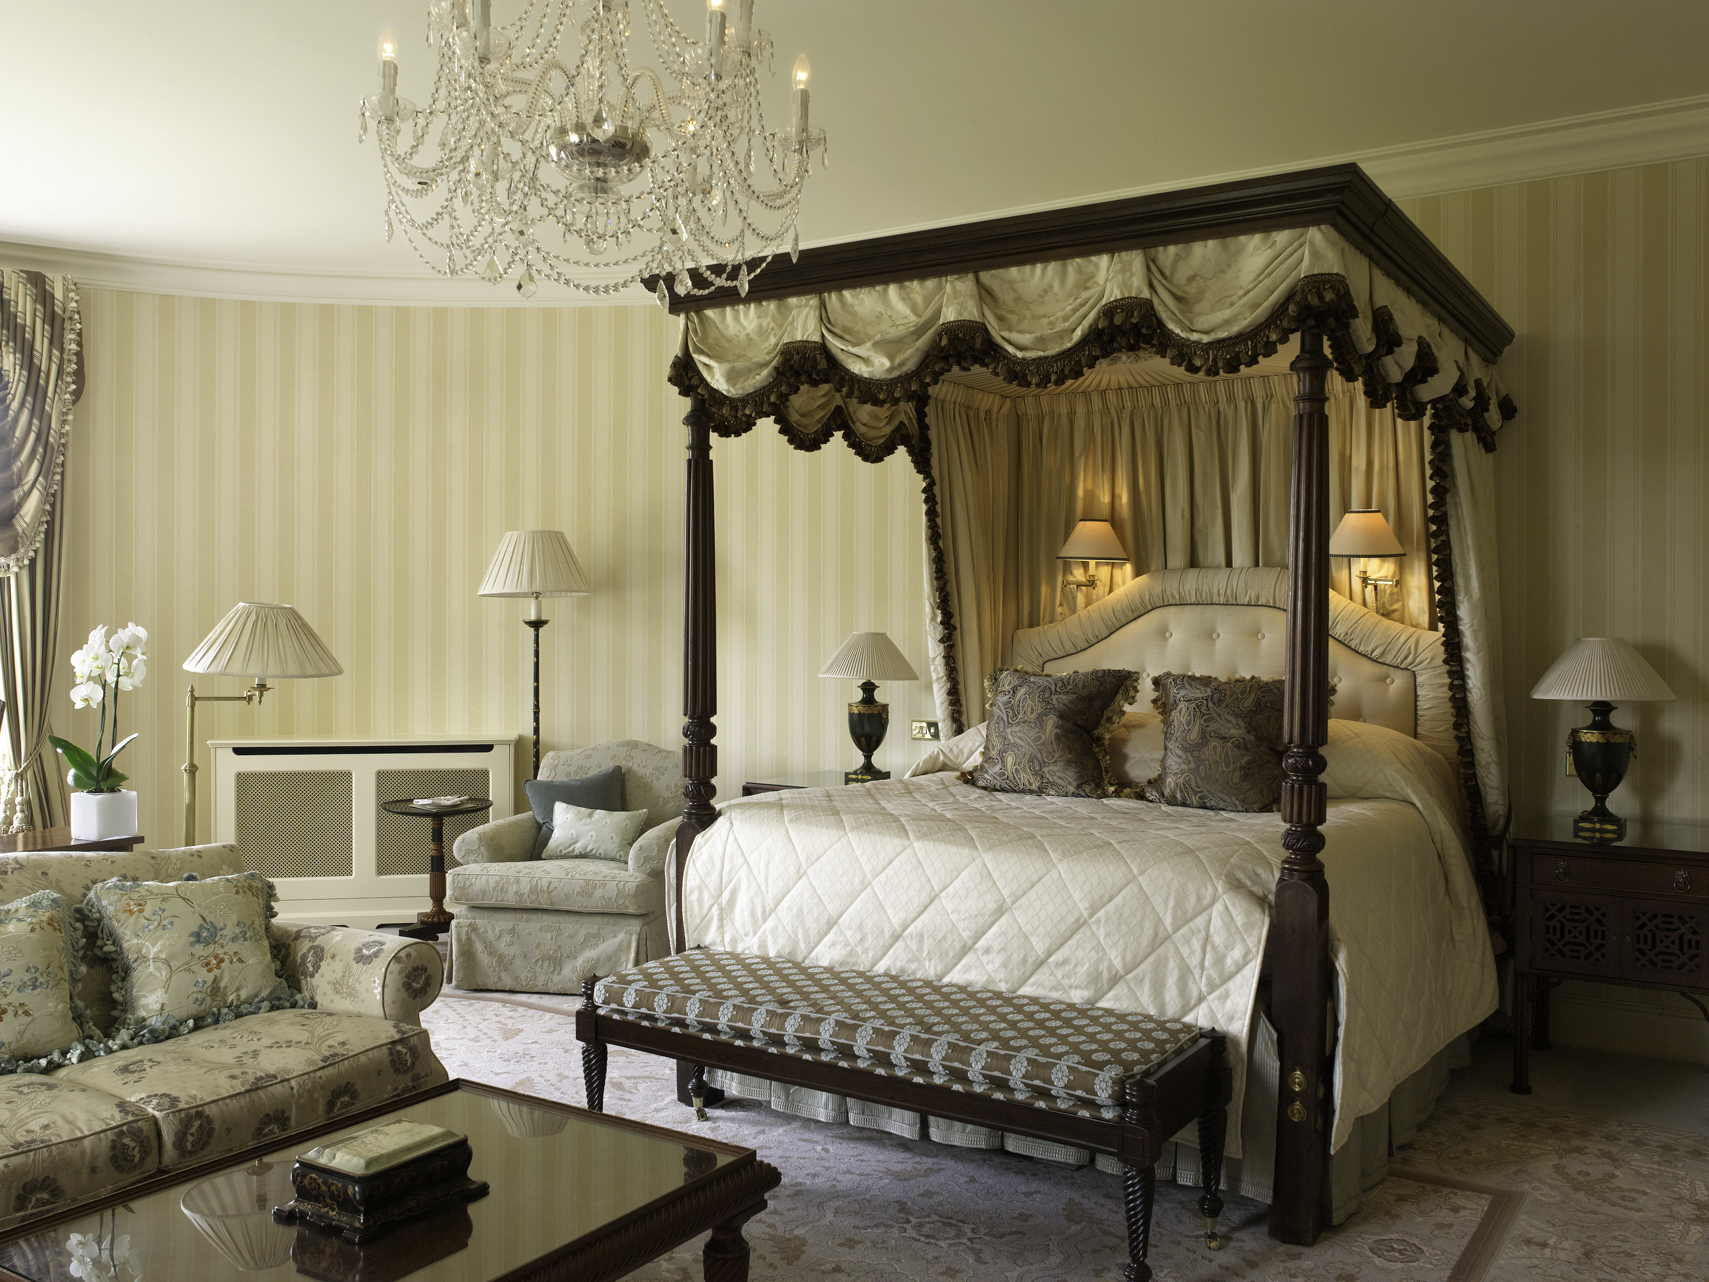 Lucknam Park Hotel & Spa, Wiltshire A Luxury Guide to the Cotswolds